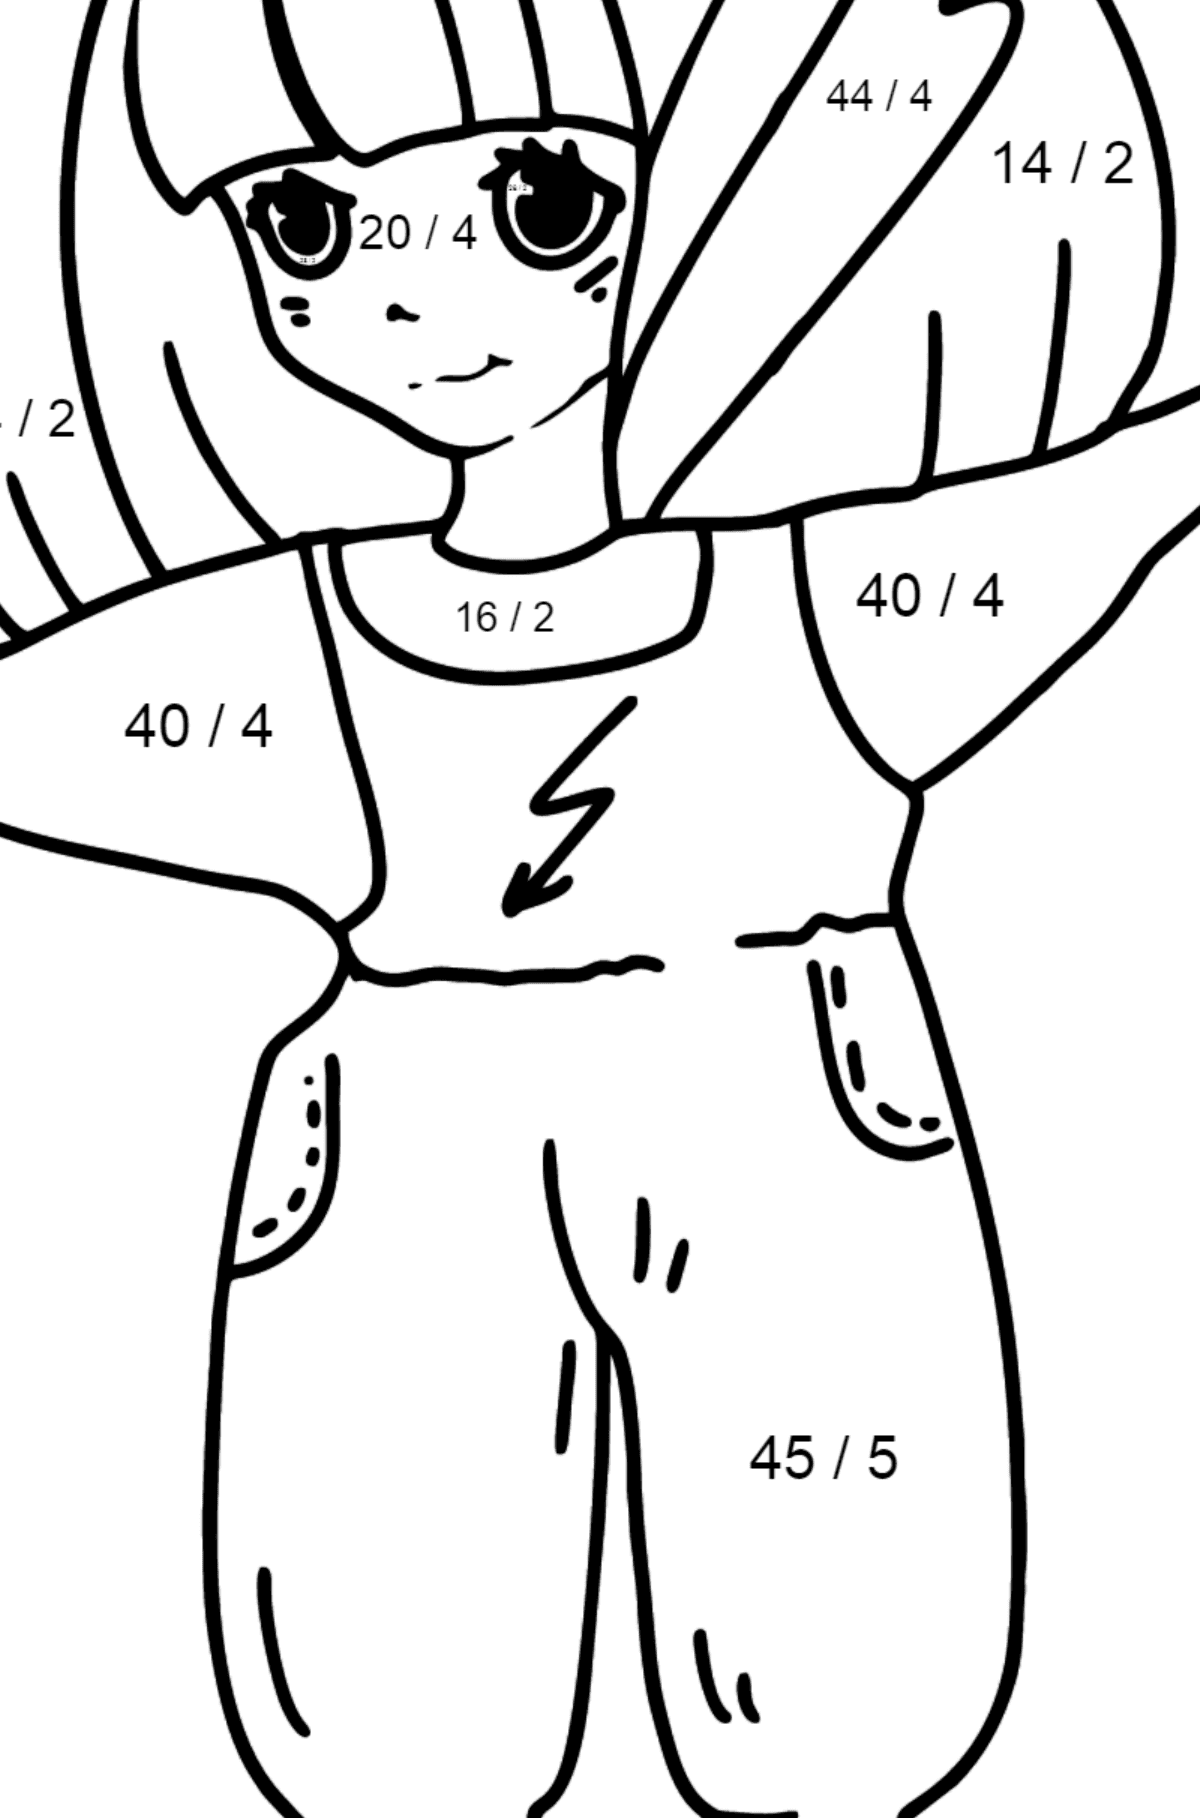 Thunder Anime Girl Coloring Pages - Math Coloring - Division for Kids